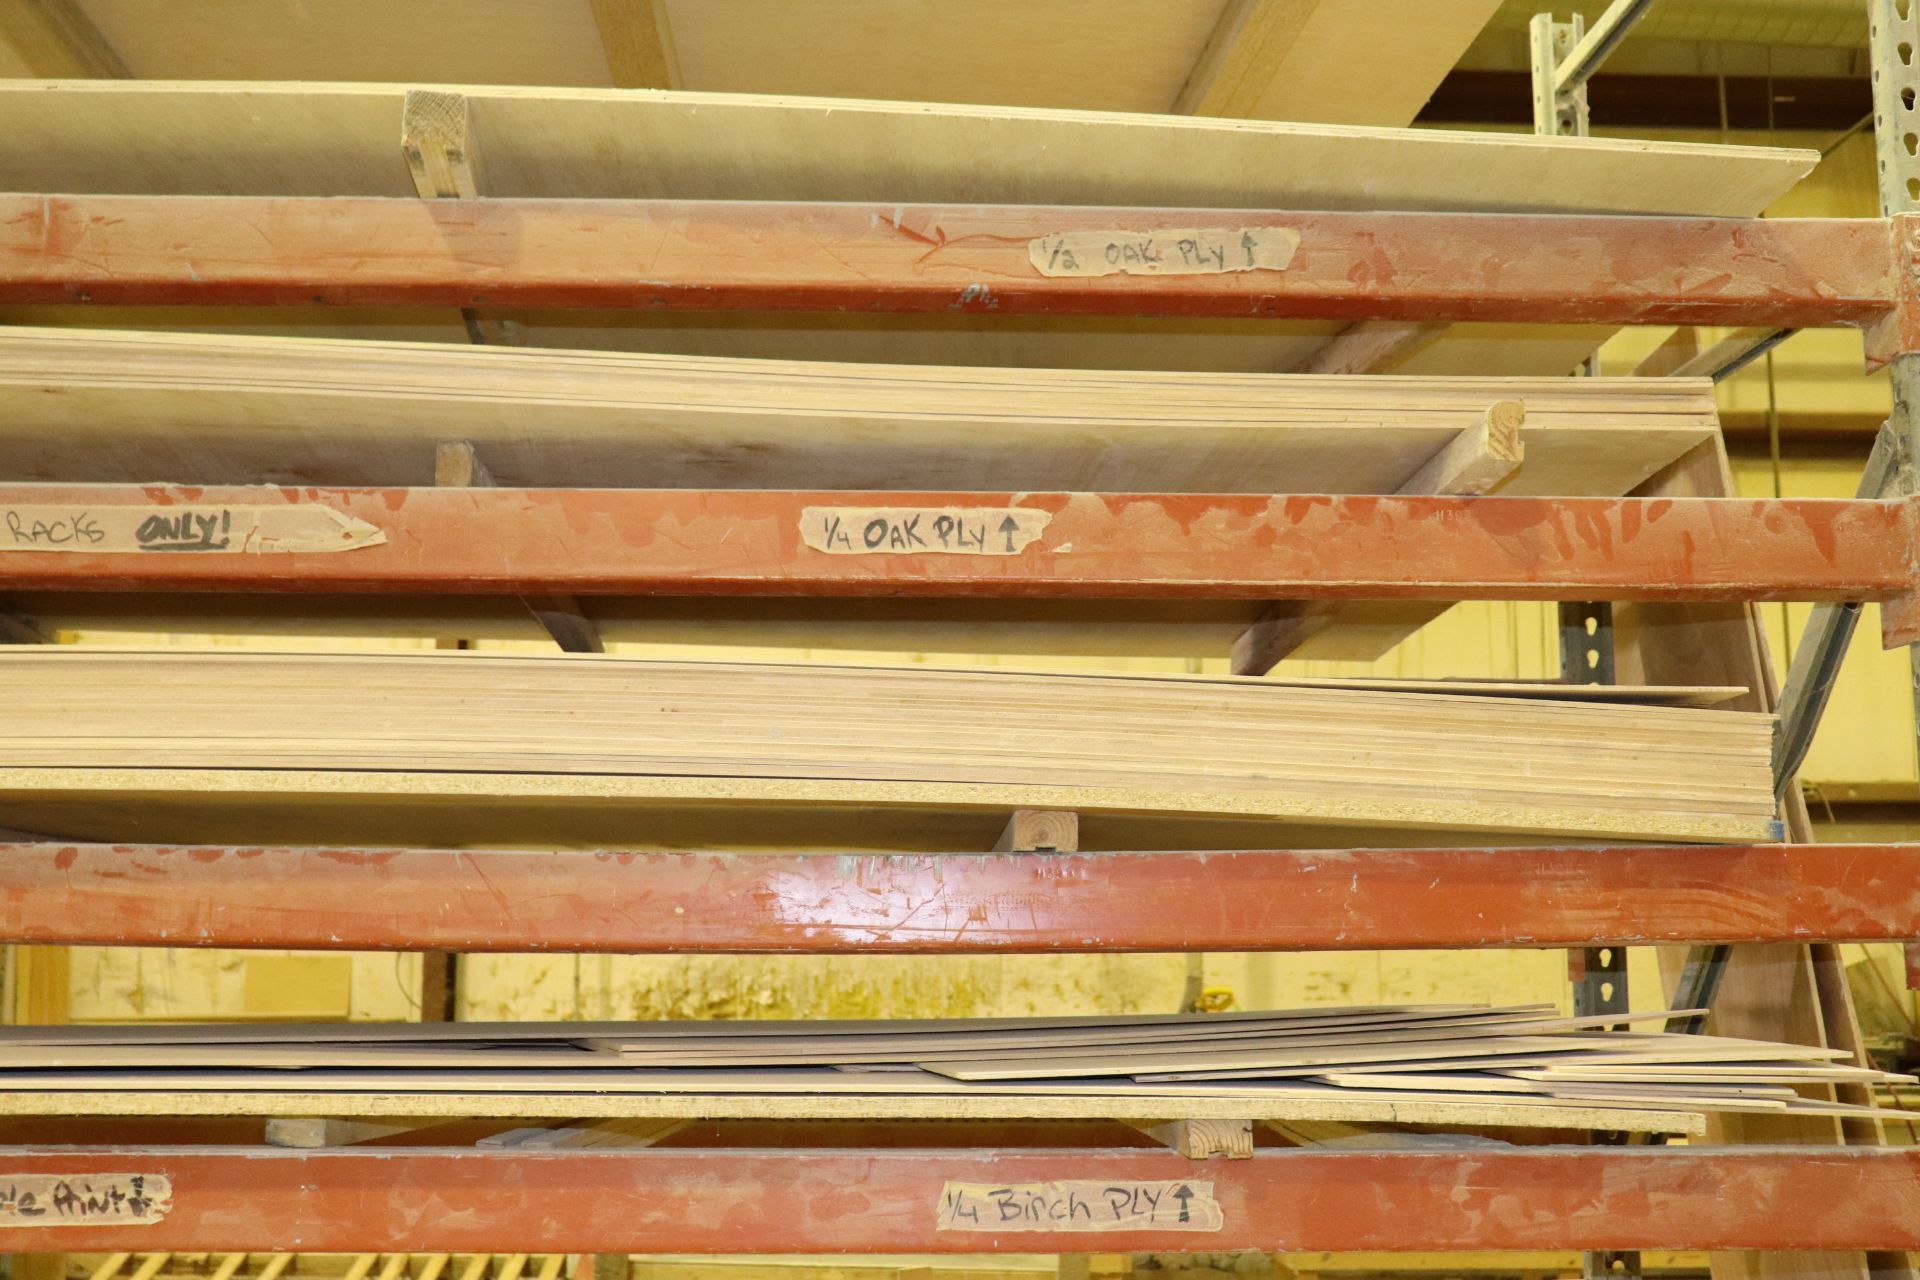 Contents of five pallet racks, 4 x 8, laminated wood stock - Image 9 of 11